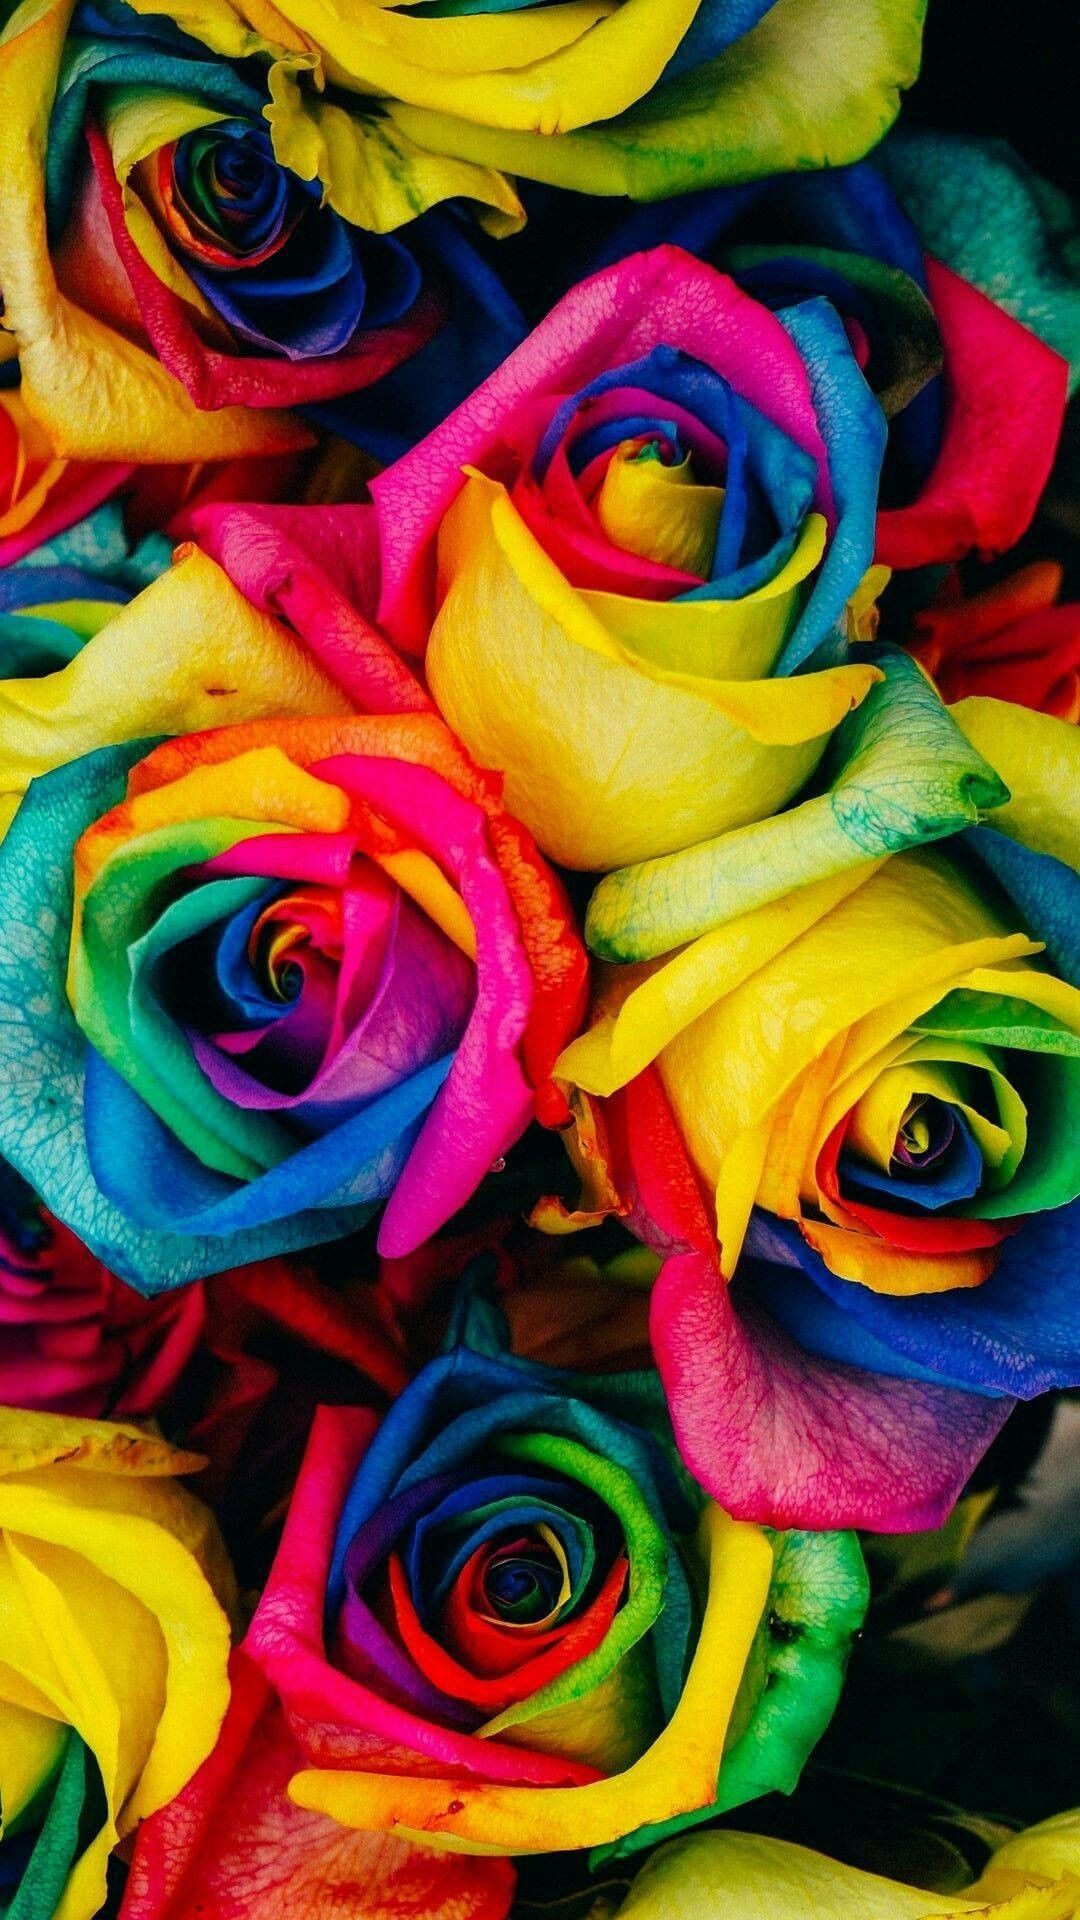 1080x1920 Cute Pictures, Rose Wallpaper, Wallpaper Backgrounds, Rainbow Roses, Flowers,  Lock Screens